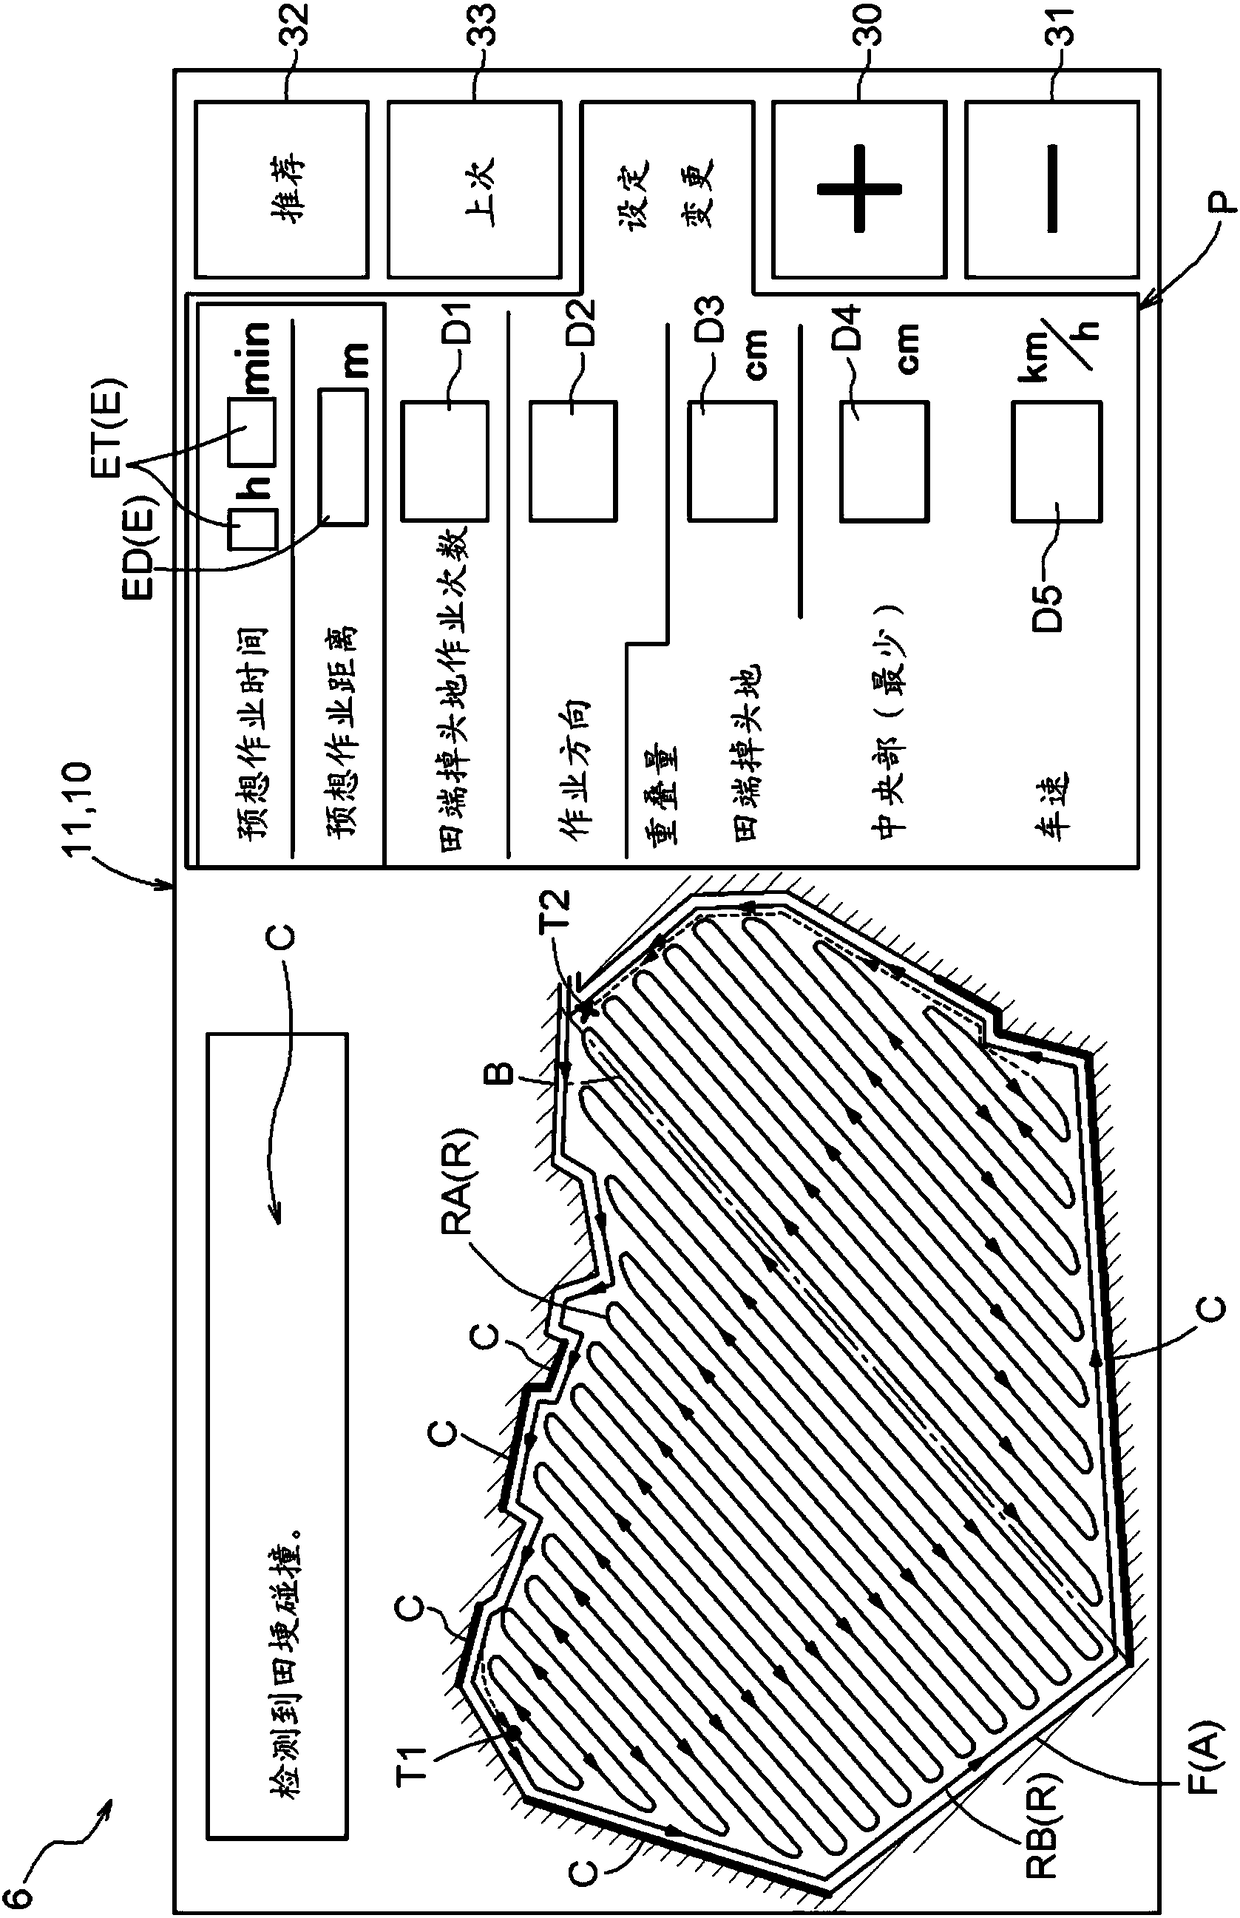 Travel route generation device